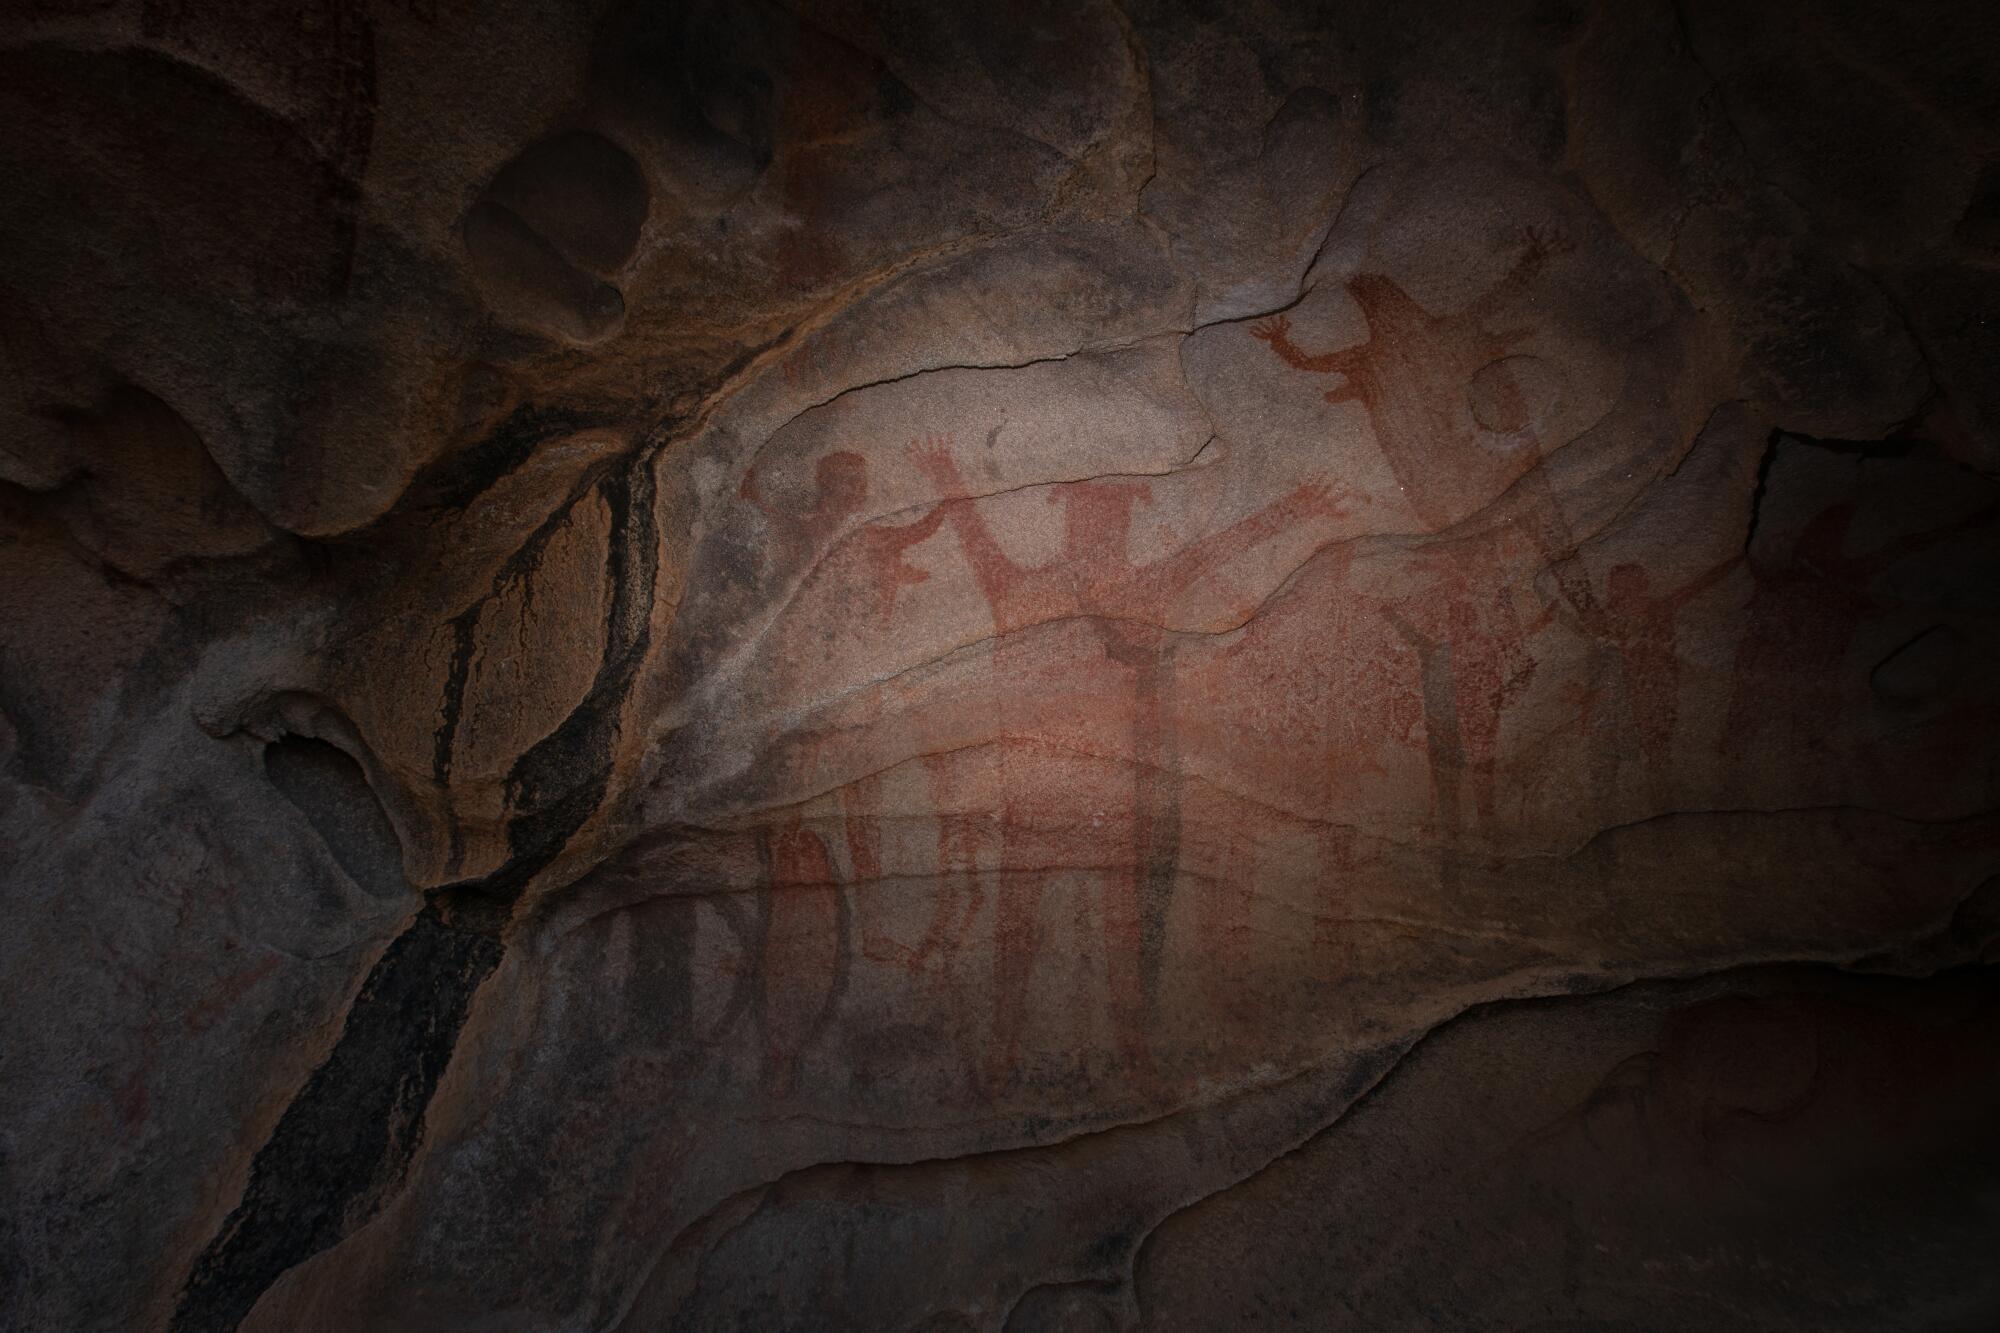 A cave wall, lit only by flashlight, showing ancient paintings of red humanoid figures.